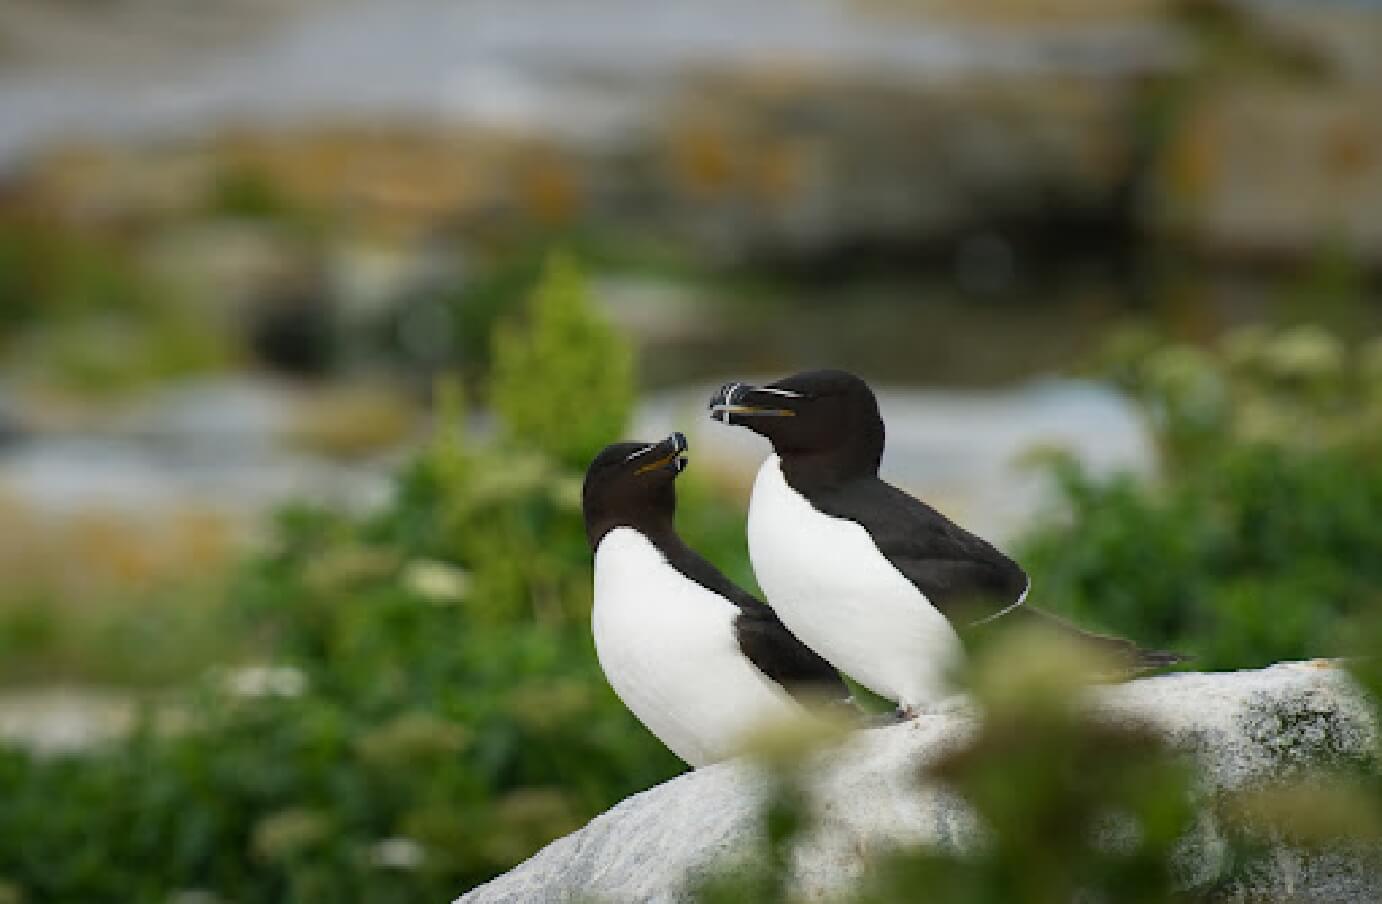 Photo of two Great Auk's in the wild, perched on a rock